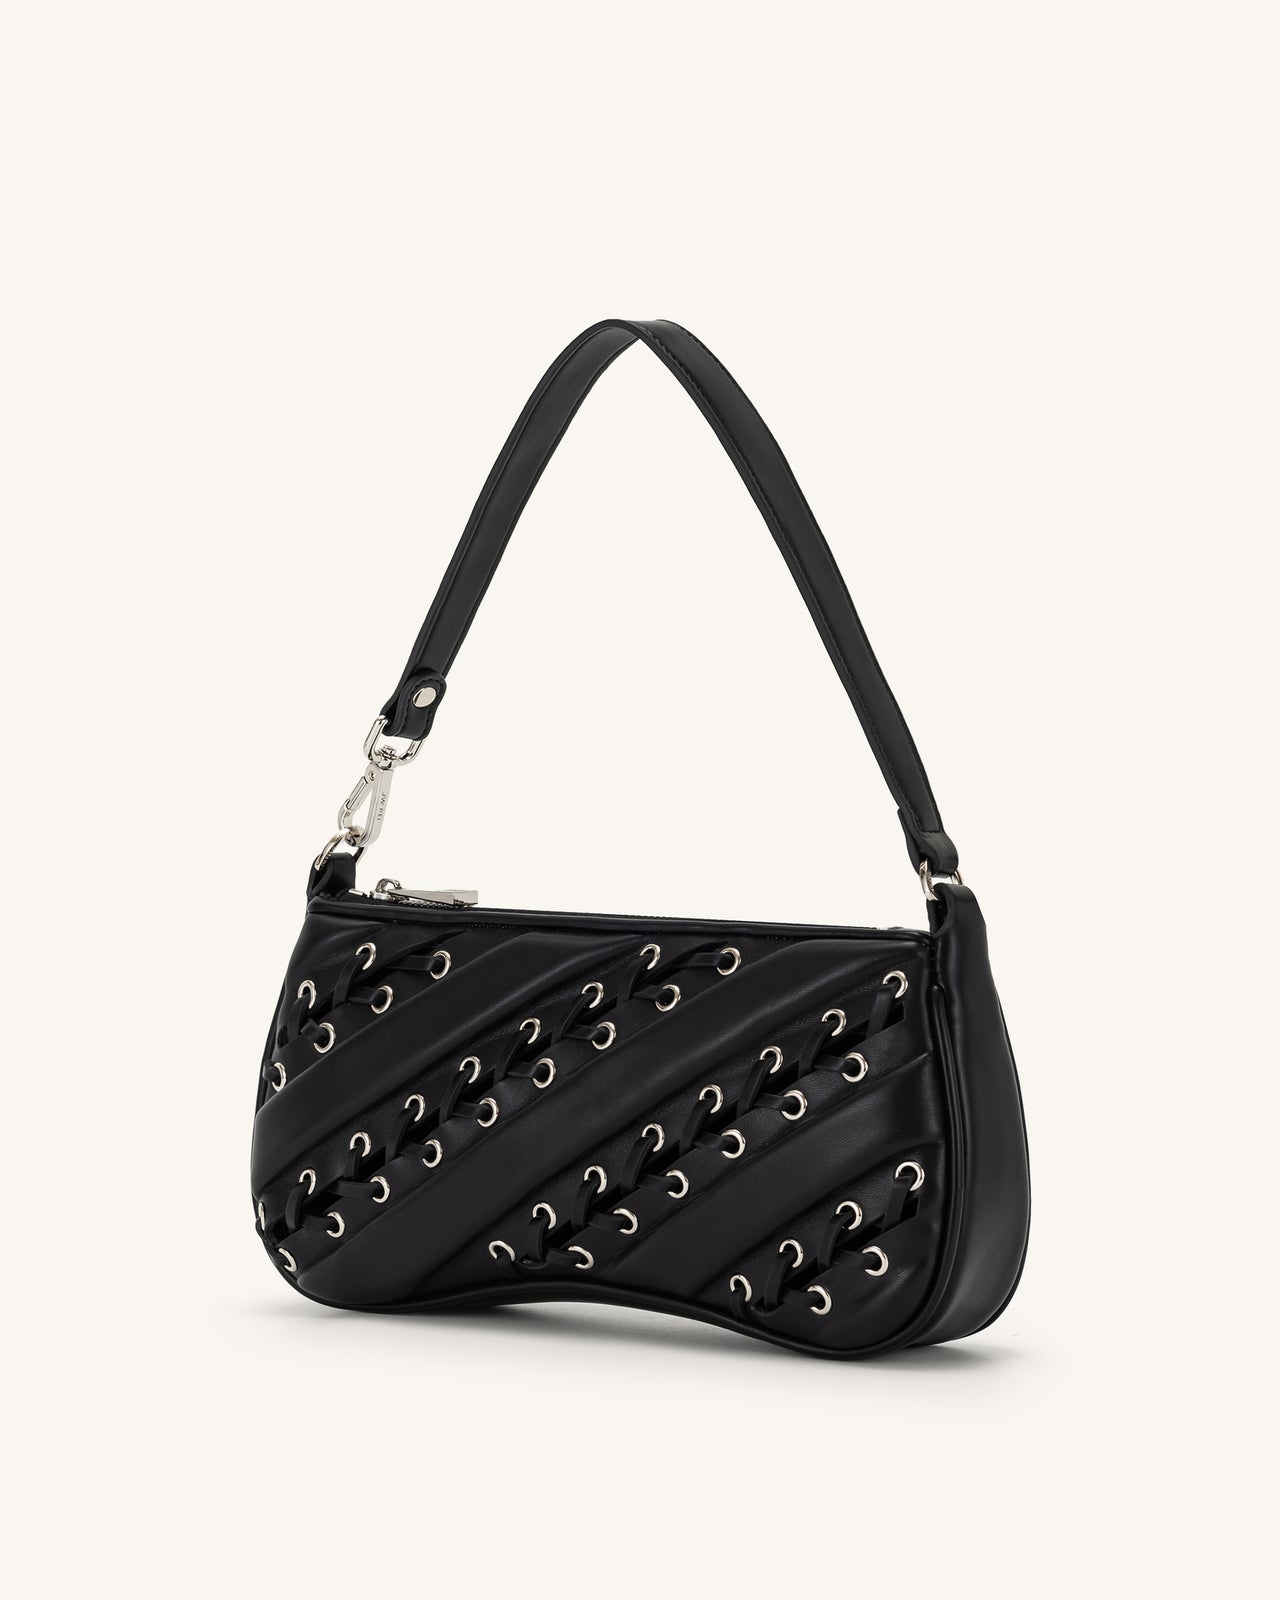 JW Pei Abacus Bag Archives - luxfy